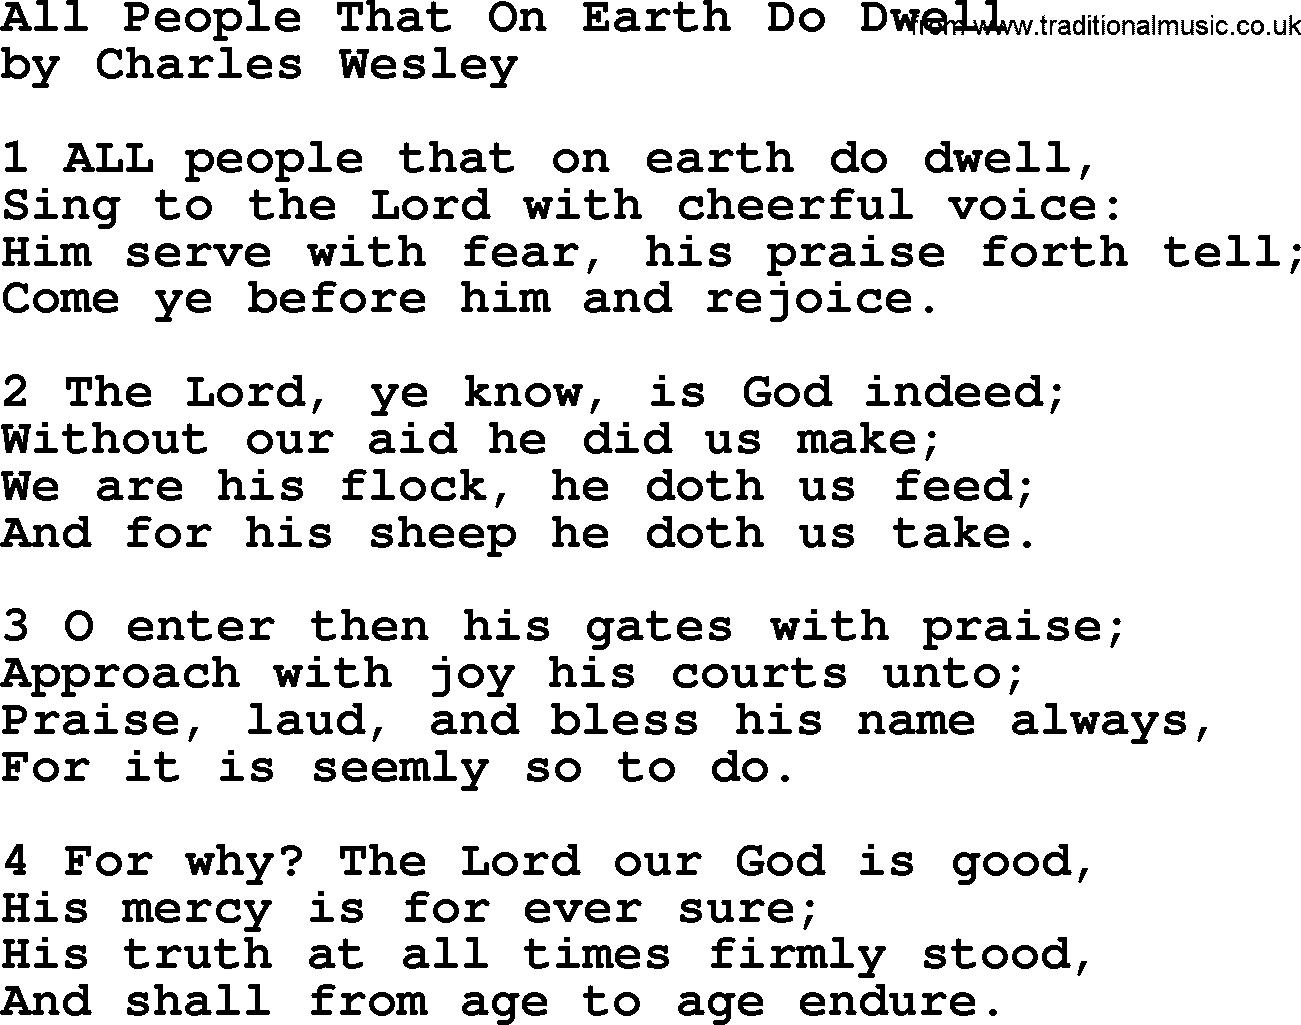 Charles Wesley hymn: All People That On Earth Do Dwell, lyrics